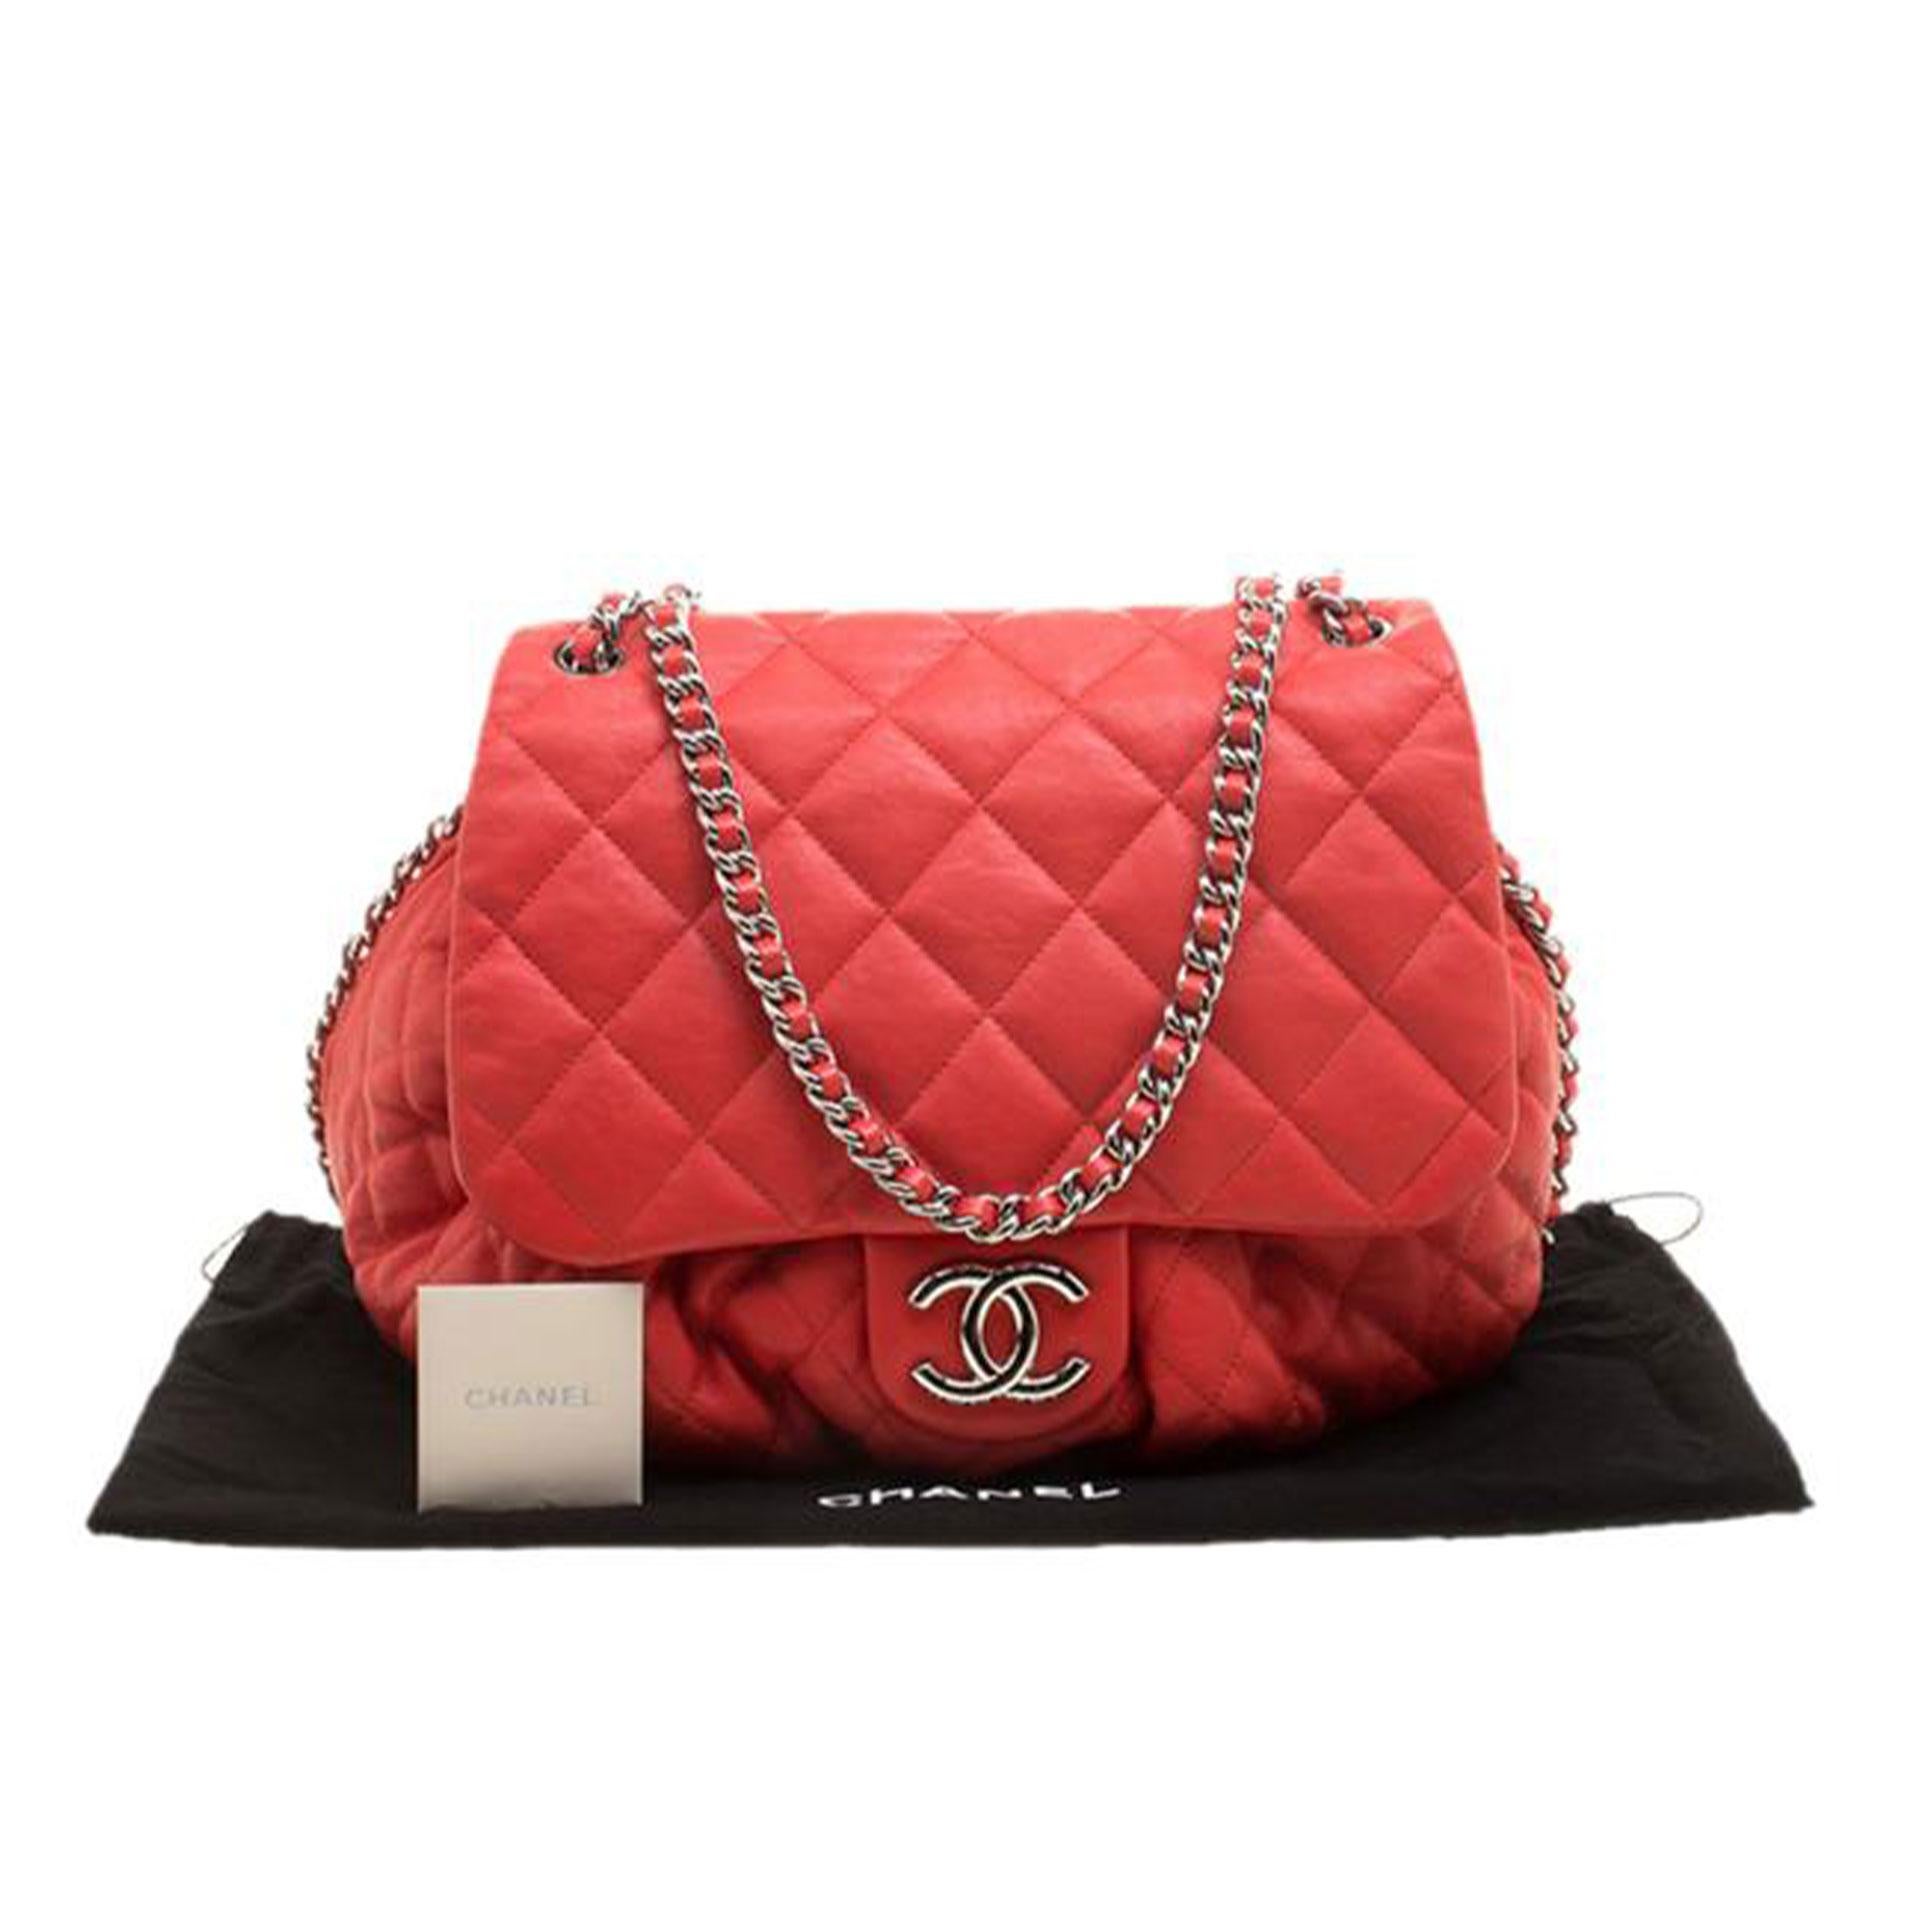 Chanel Large Chain Around Limited Edition Pristine Red Calfskin Leather Flap Bag For Sale 5